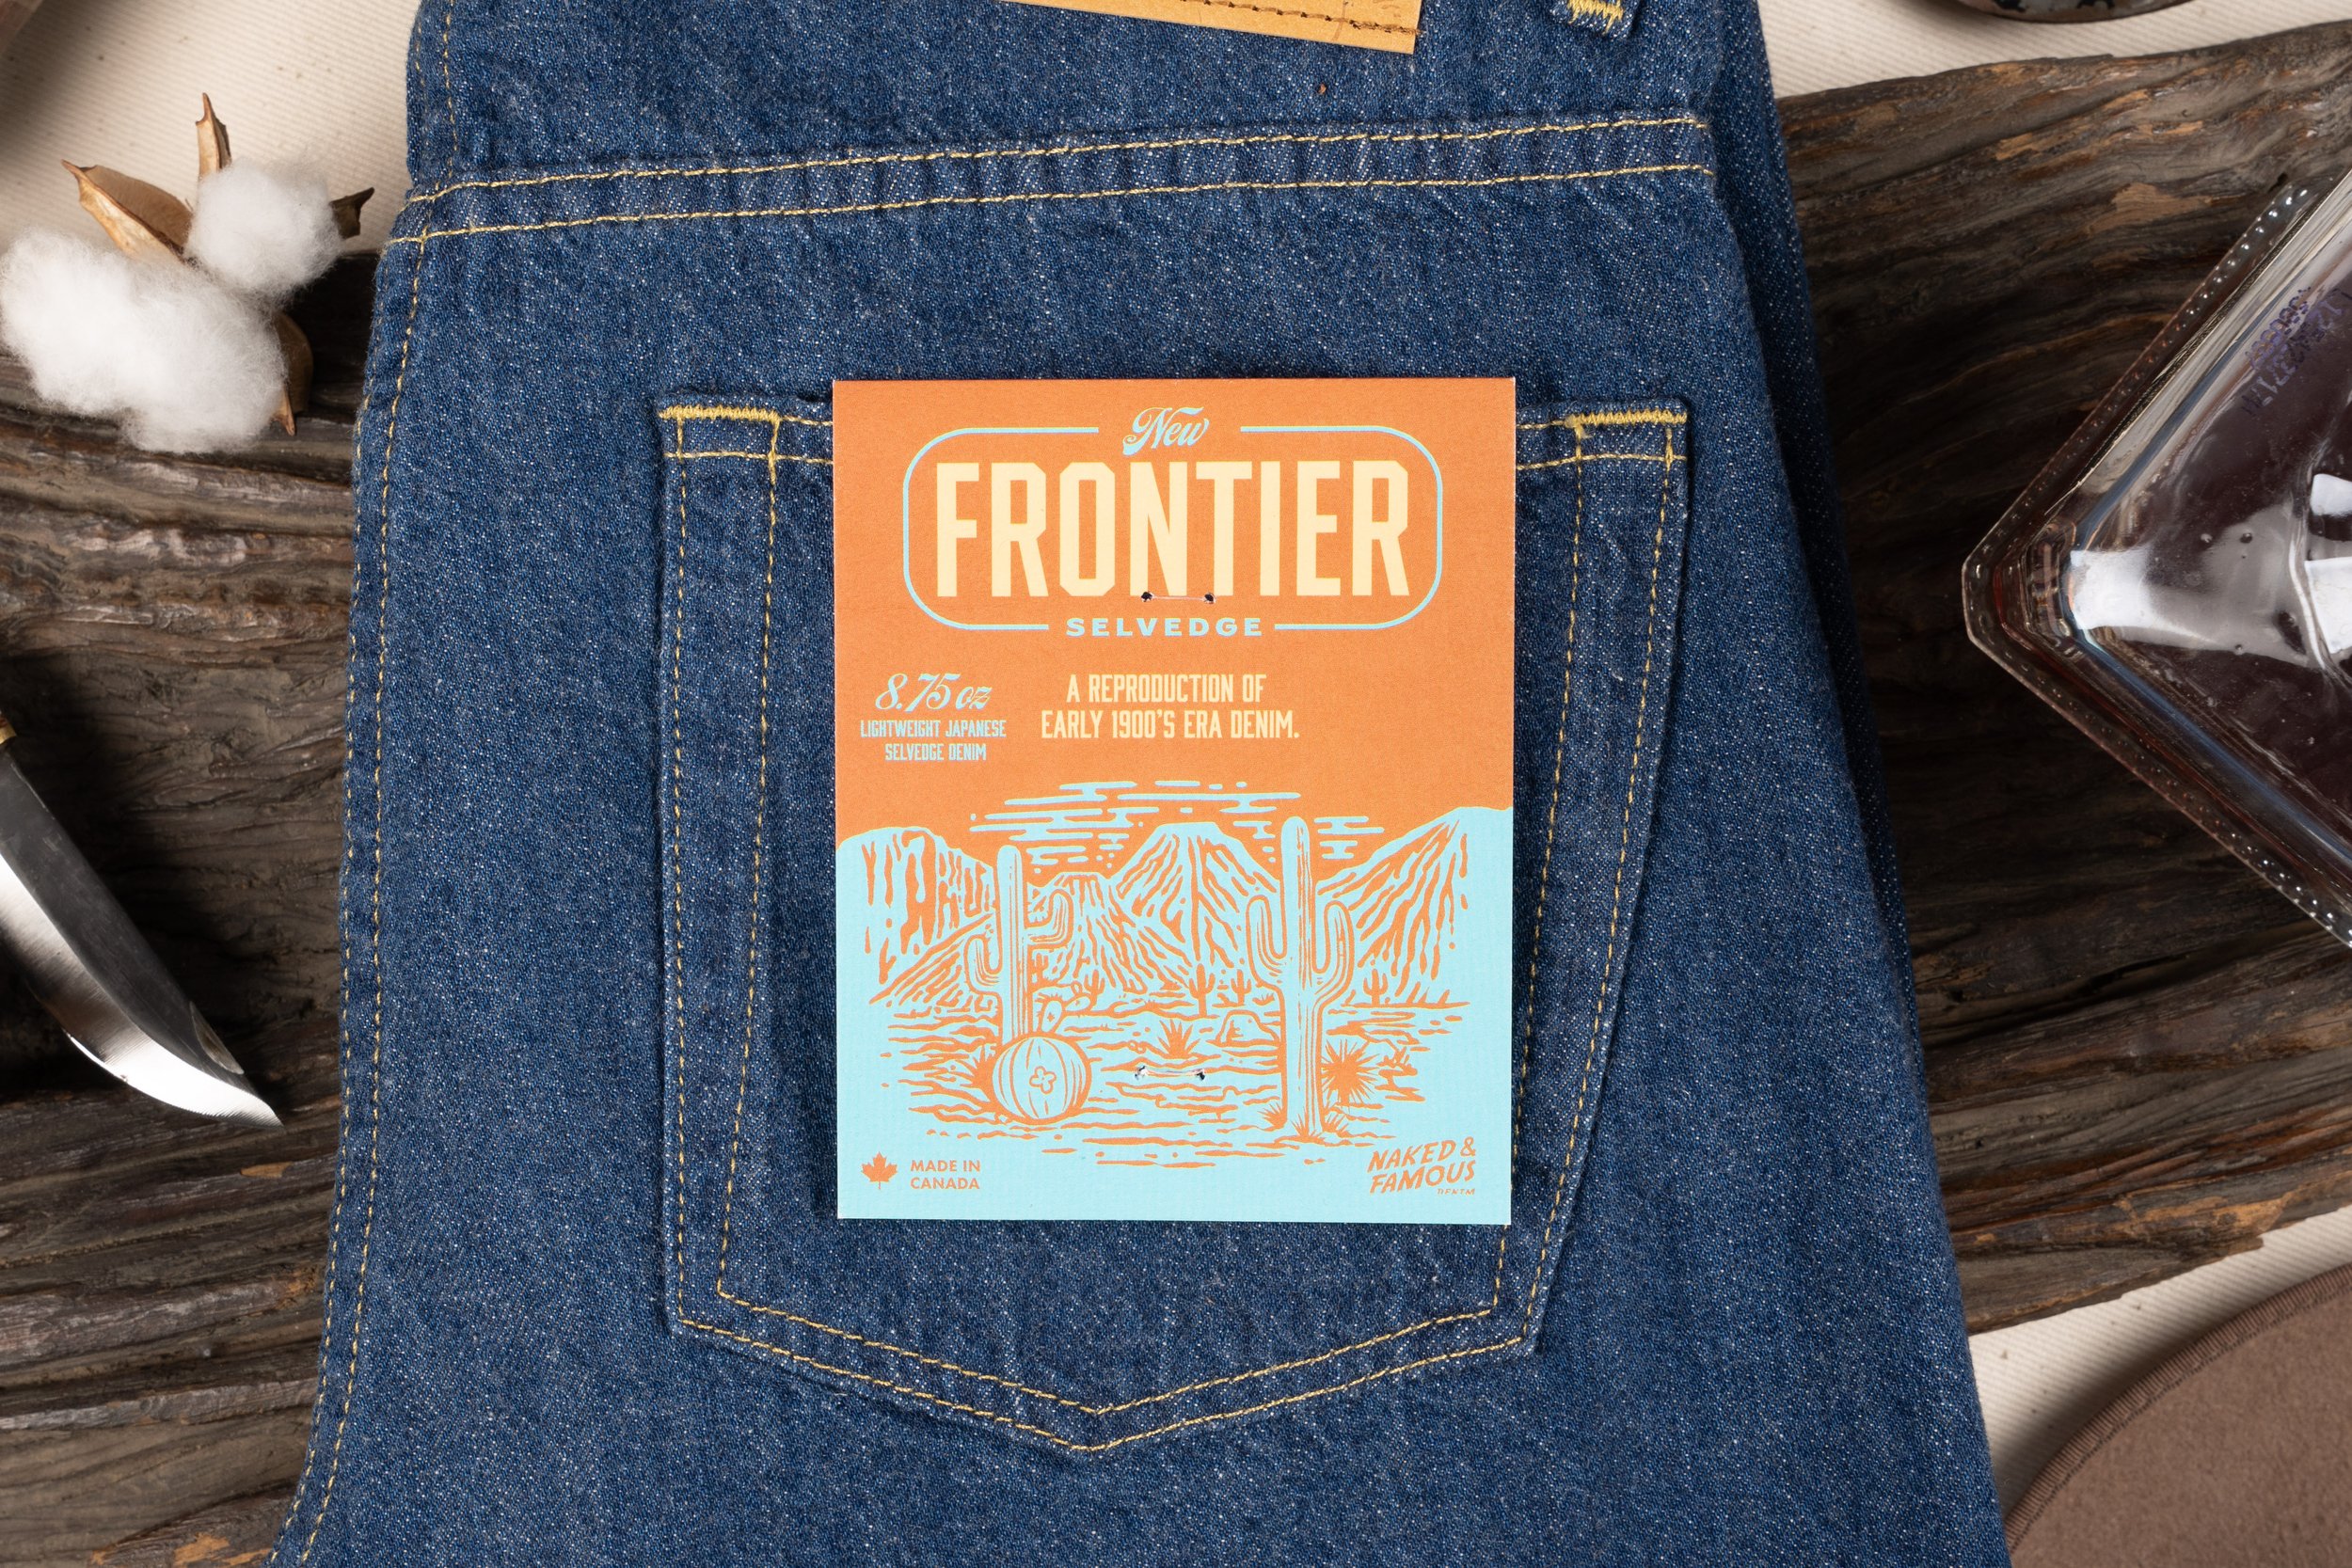 Get the Authentic Look and Feel of Vintage Jeans with the New Frontier  Selvedge  Naked  Famous Denim